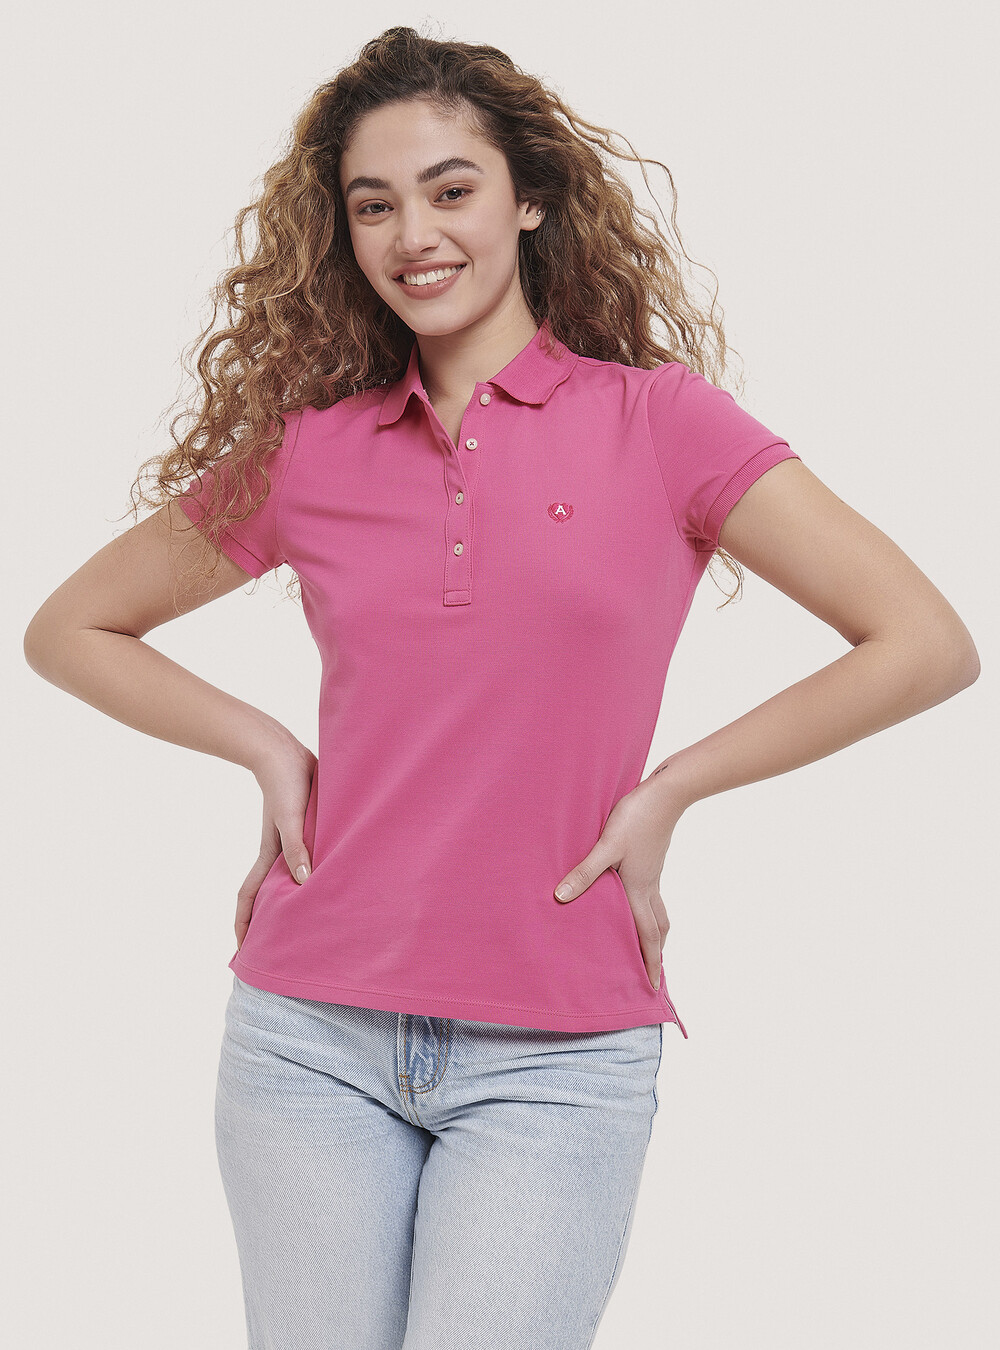 Unisex LIVE Relaxed Fit Embroidered Cotton Piqué Polo